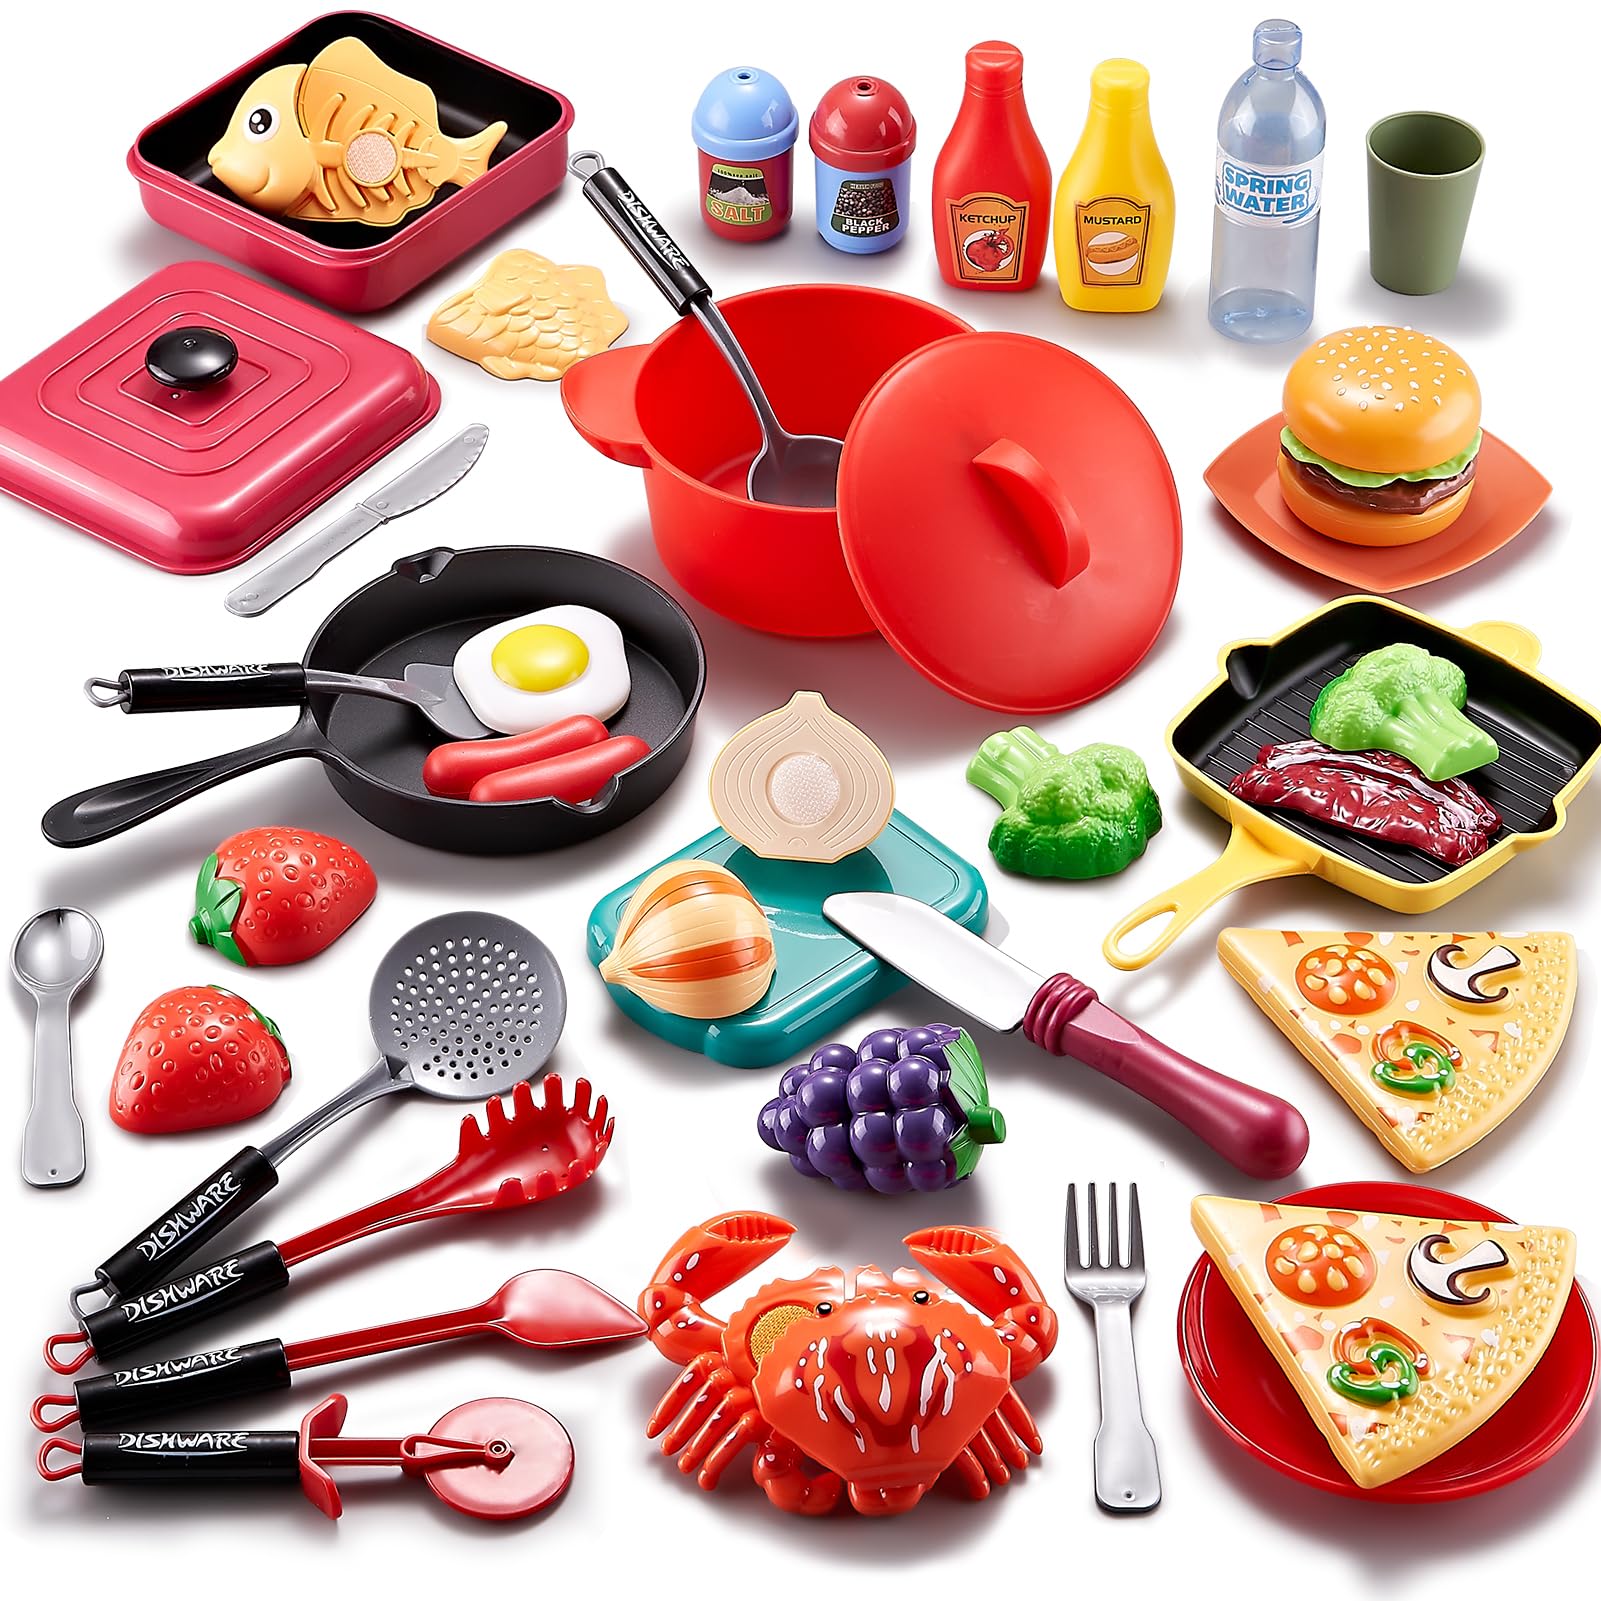 Comirth Play Kitchen Accessories – 48Pc Kitchen Toys, Kids Kitchen Playset with Kids Pots and Pans Playset, Pretend Play Food Fruit, Veggies, Pizza, Cooking Toys & Utensils, Kitchen Set for Kids Gift